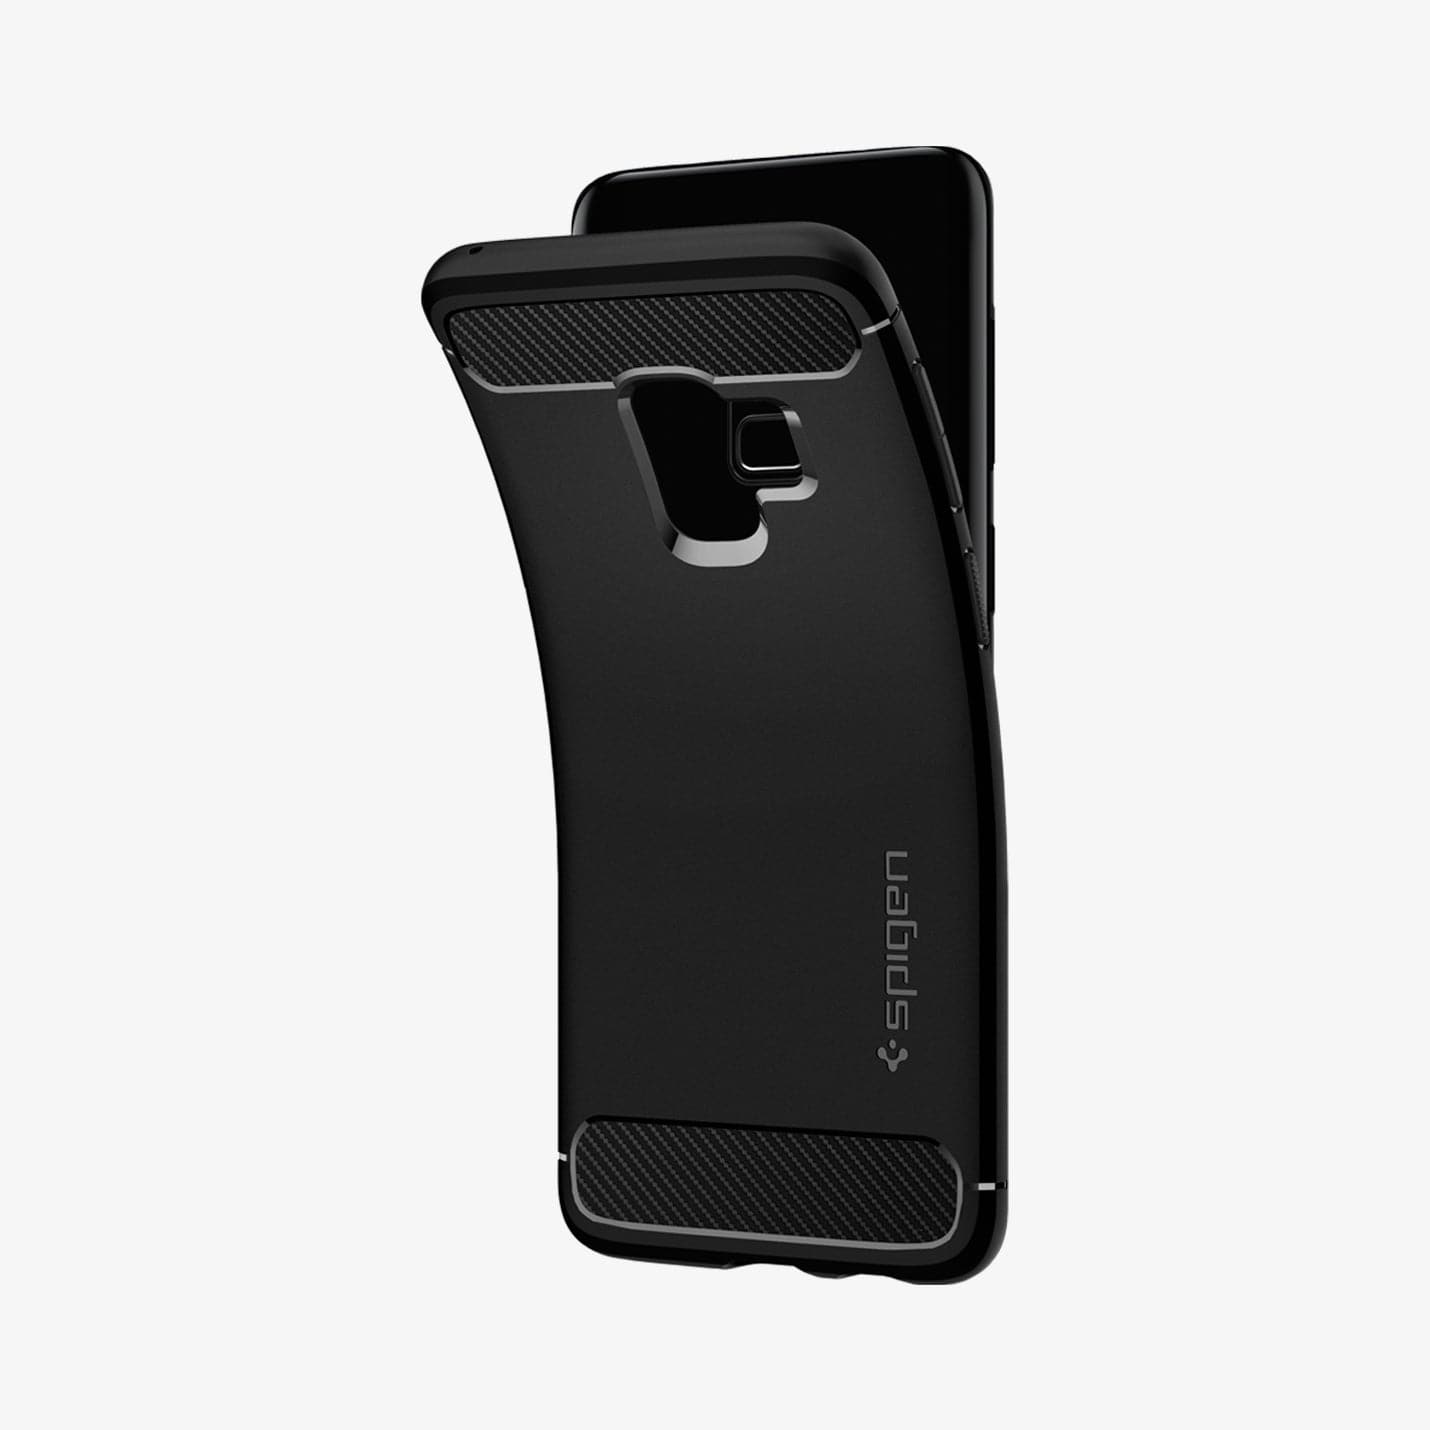 592CS22834 - Galaxy S9 Series Rugged Armor Case in black showing the back with case bending away from the device